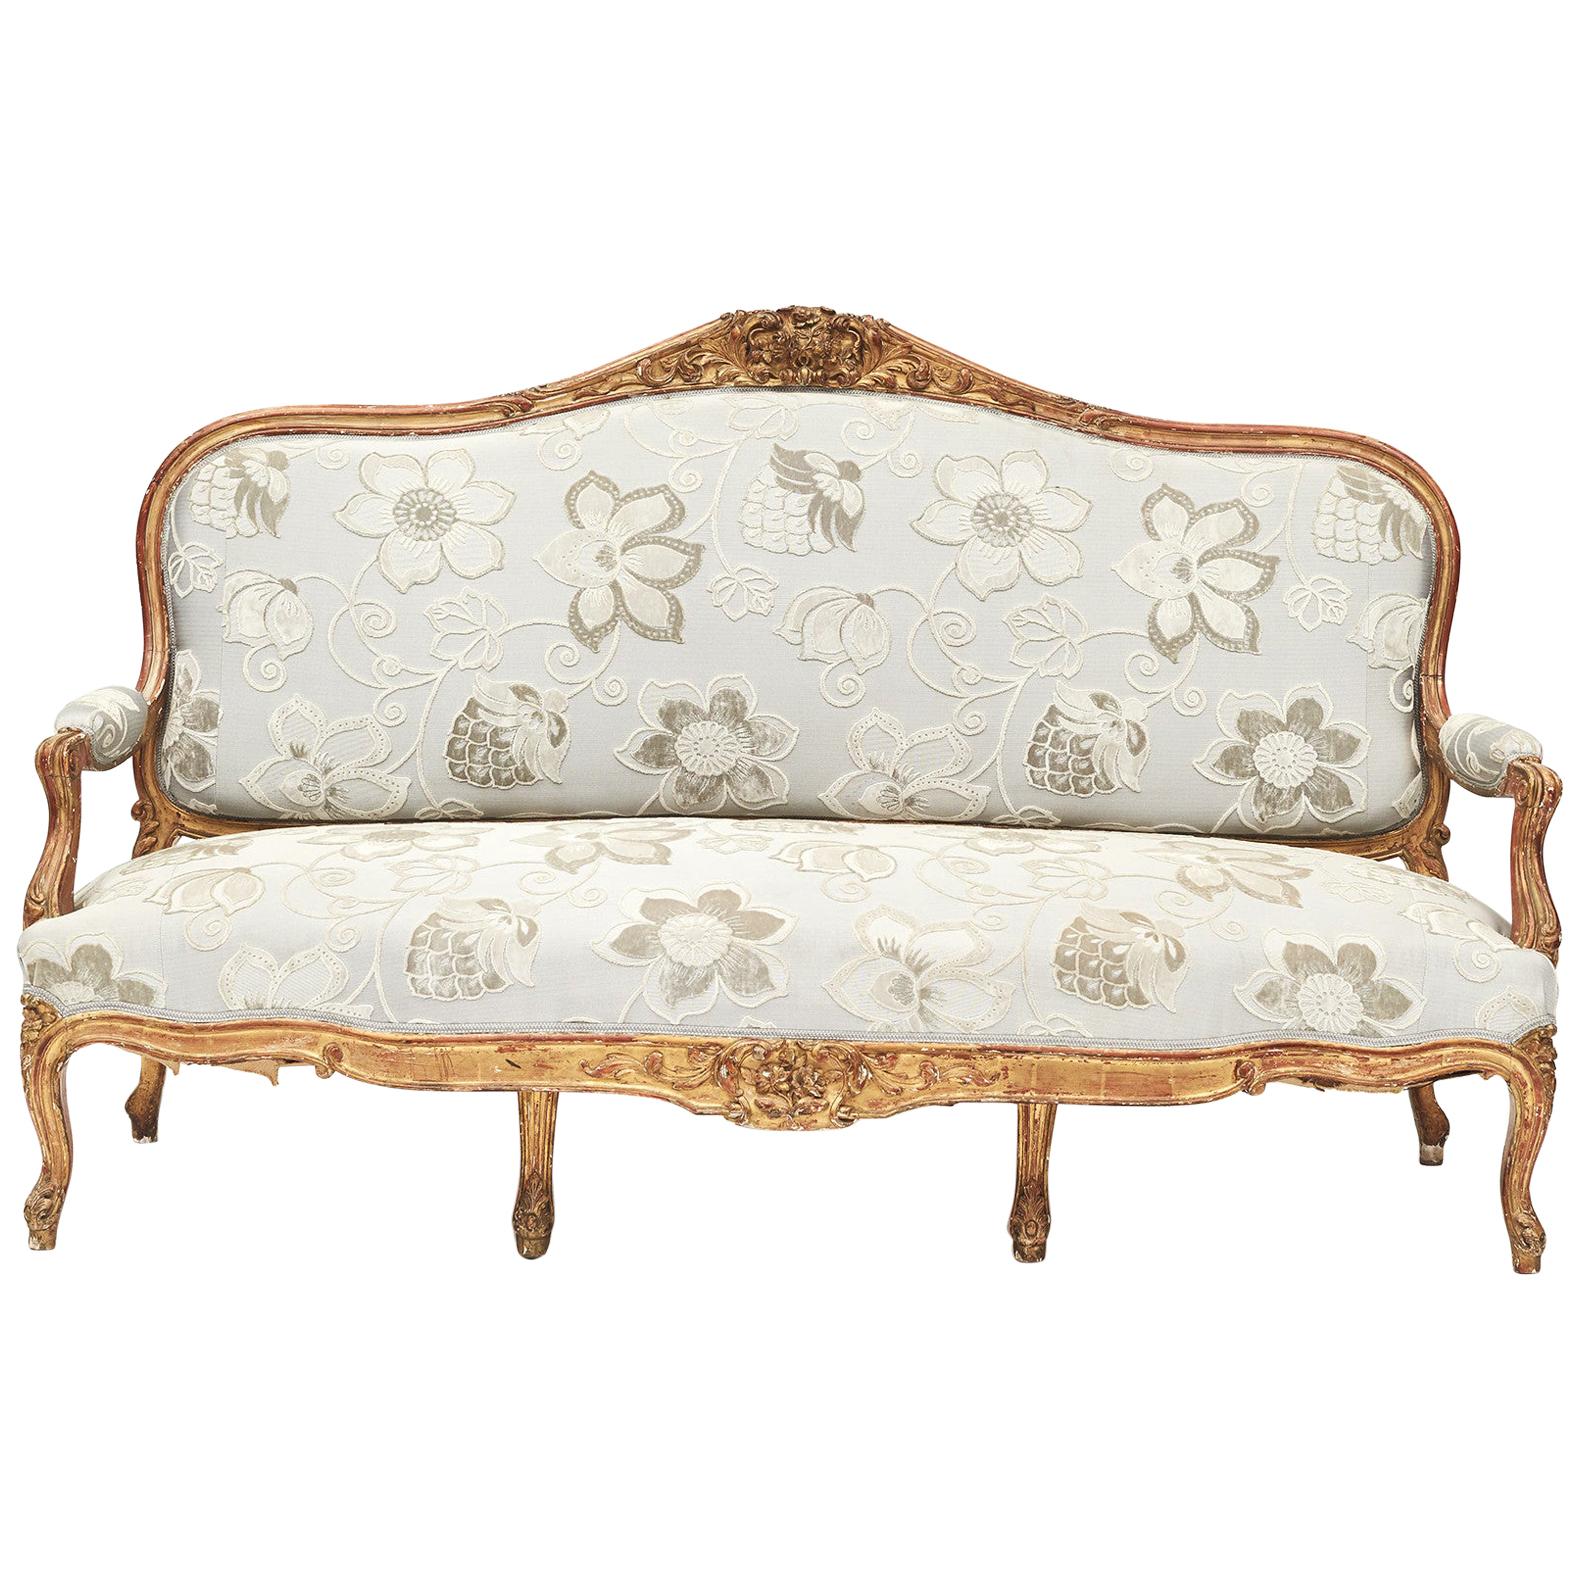 French Rococo Style Gilt Sofa Bench For Sale